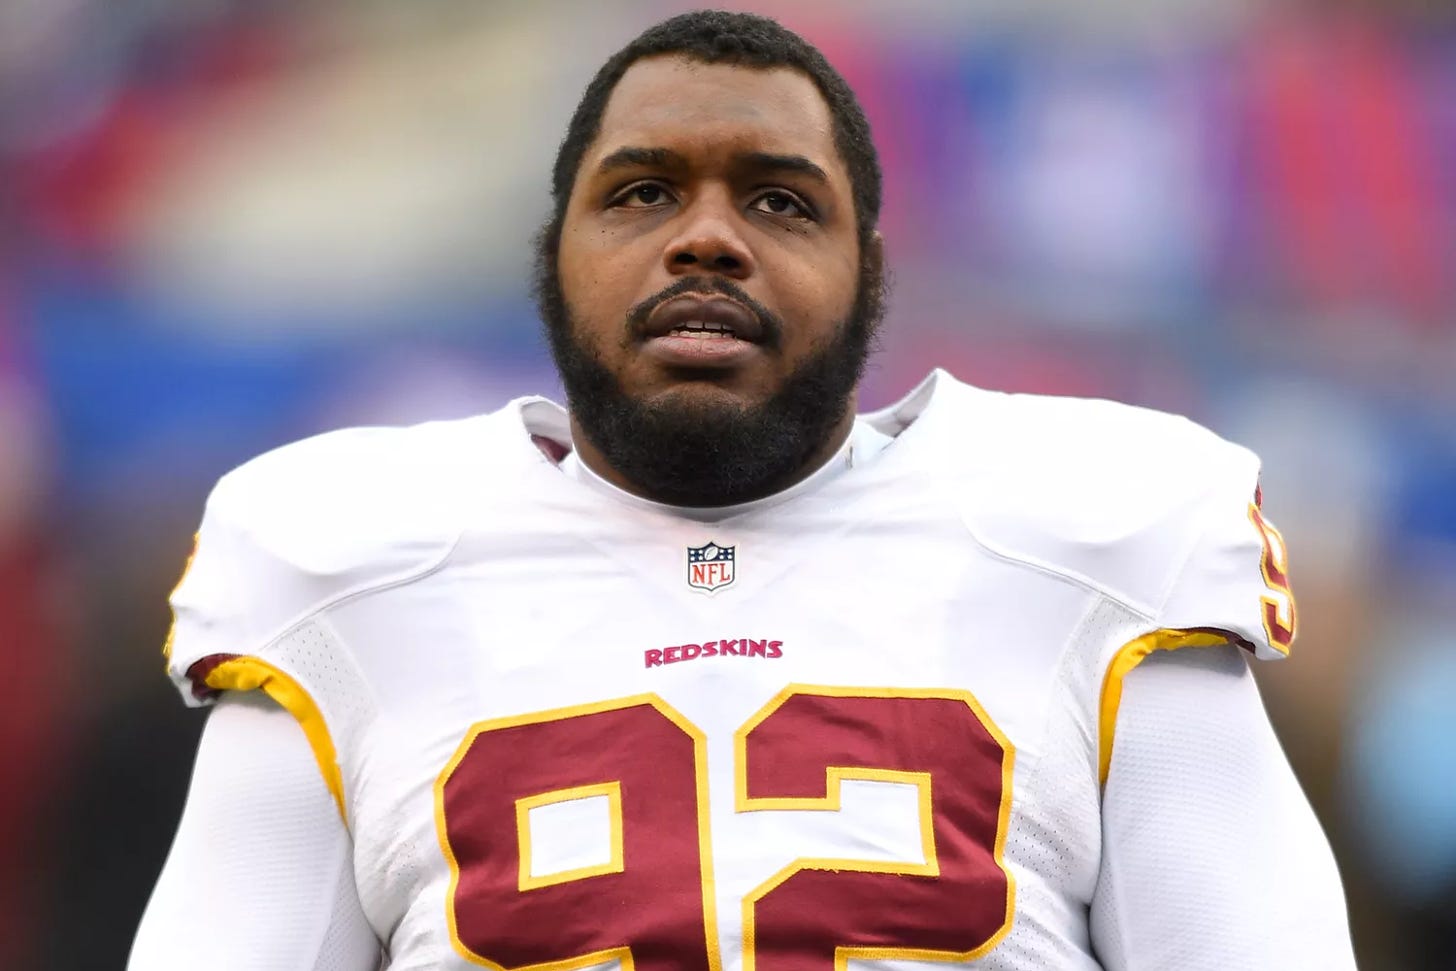 Washington Redskins nose tackle Chris Baker (92) during a NFL game between the Washington Redskins and the New York Giants at MetLife Stadium in East Rutherford, New Jersey The Giants defeated the Redskins 24-13